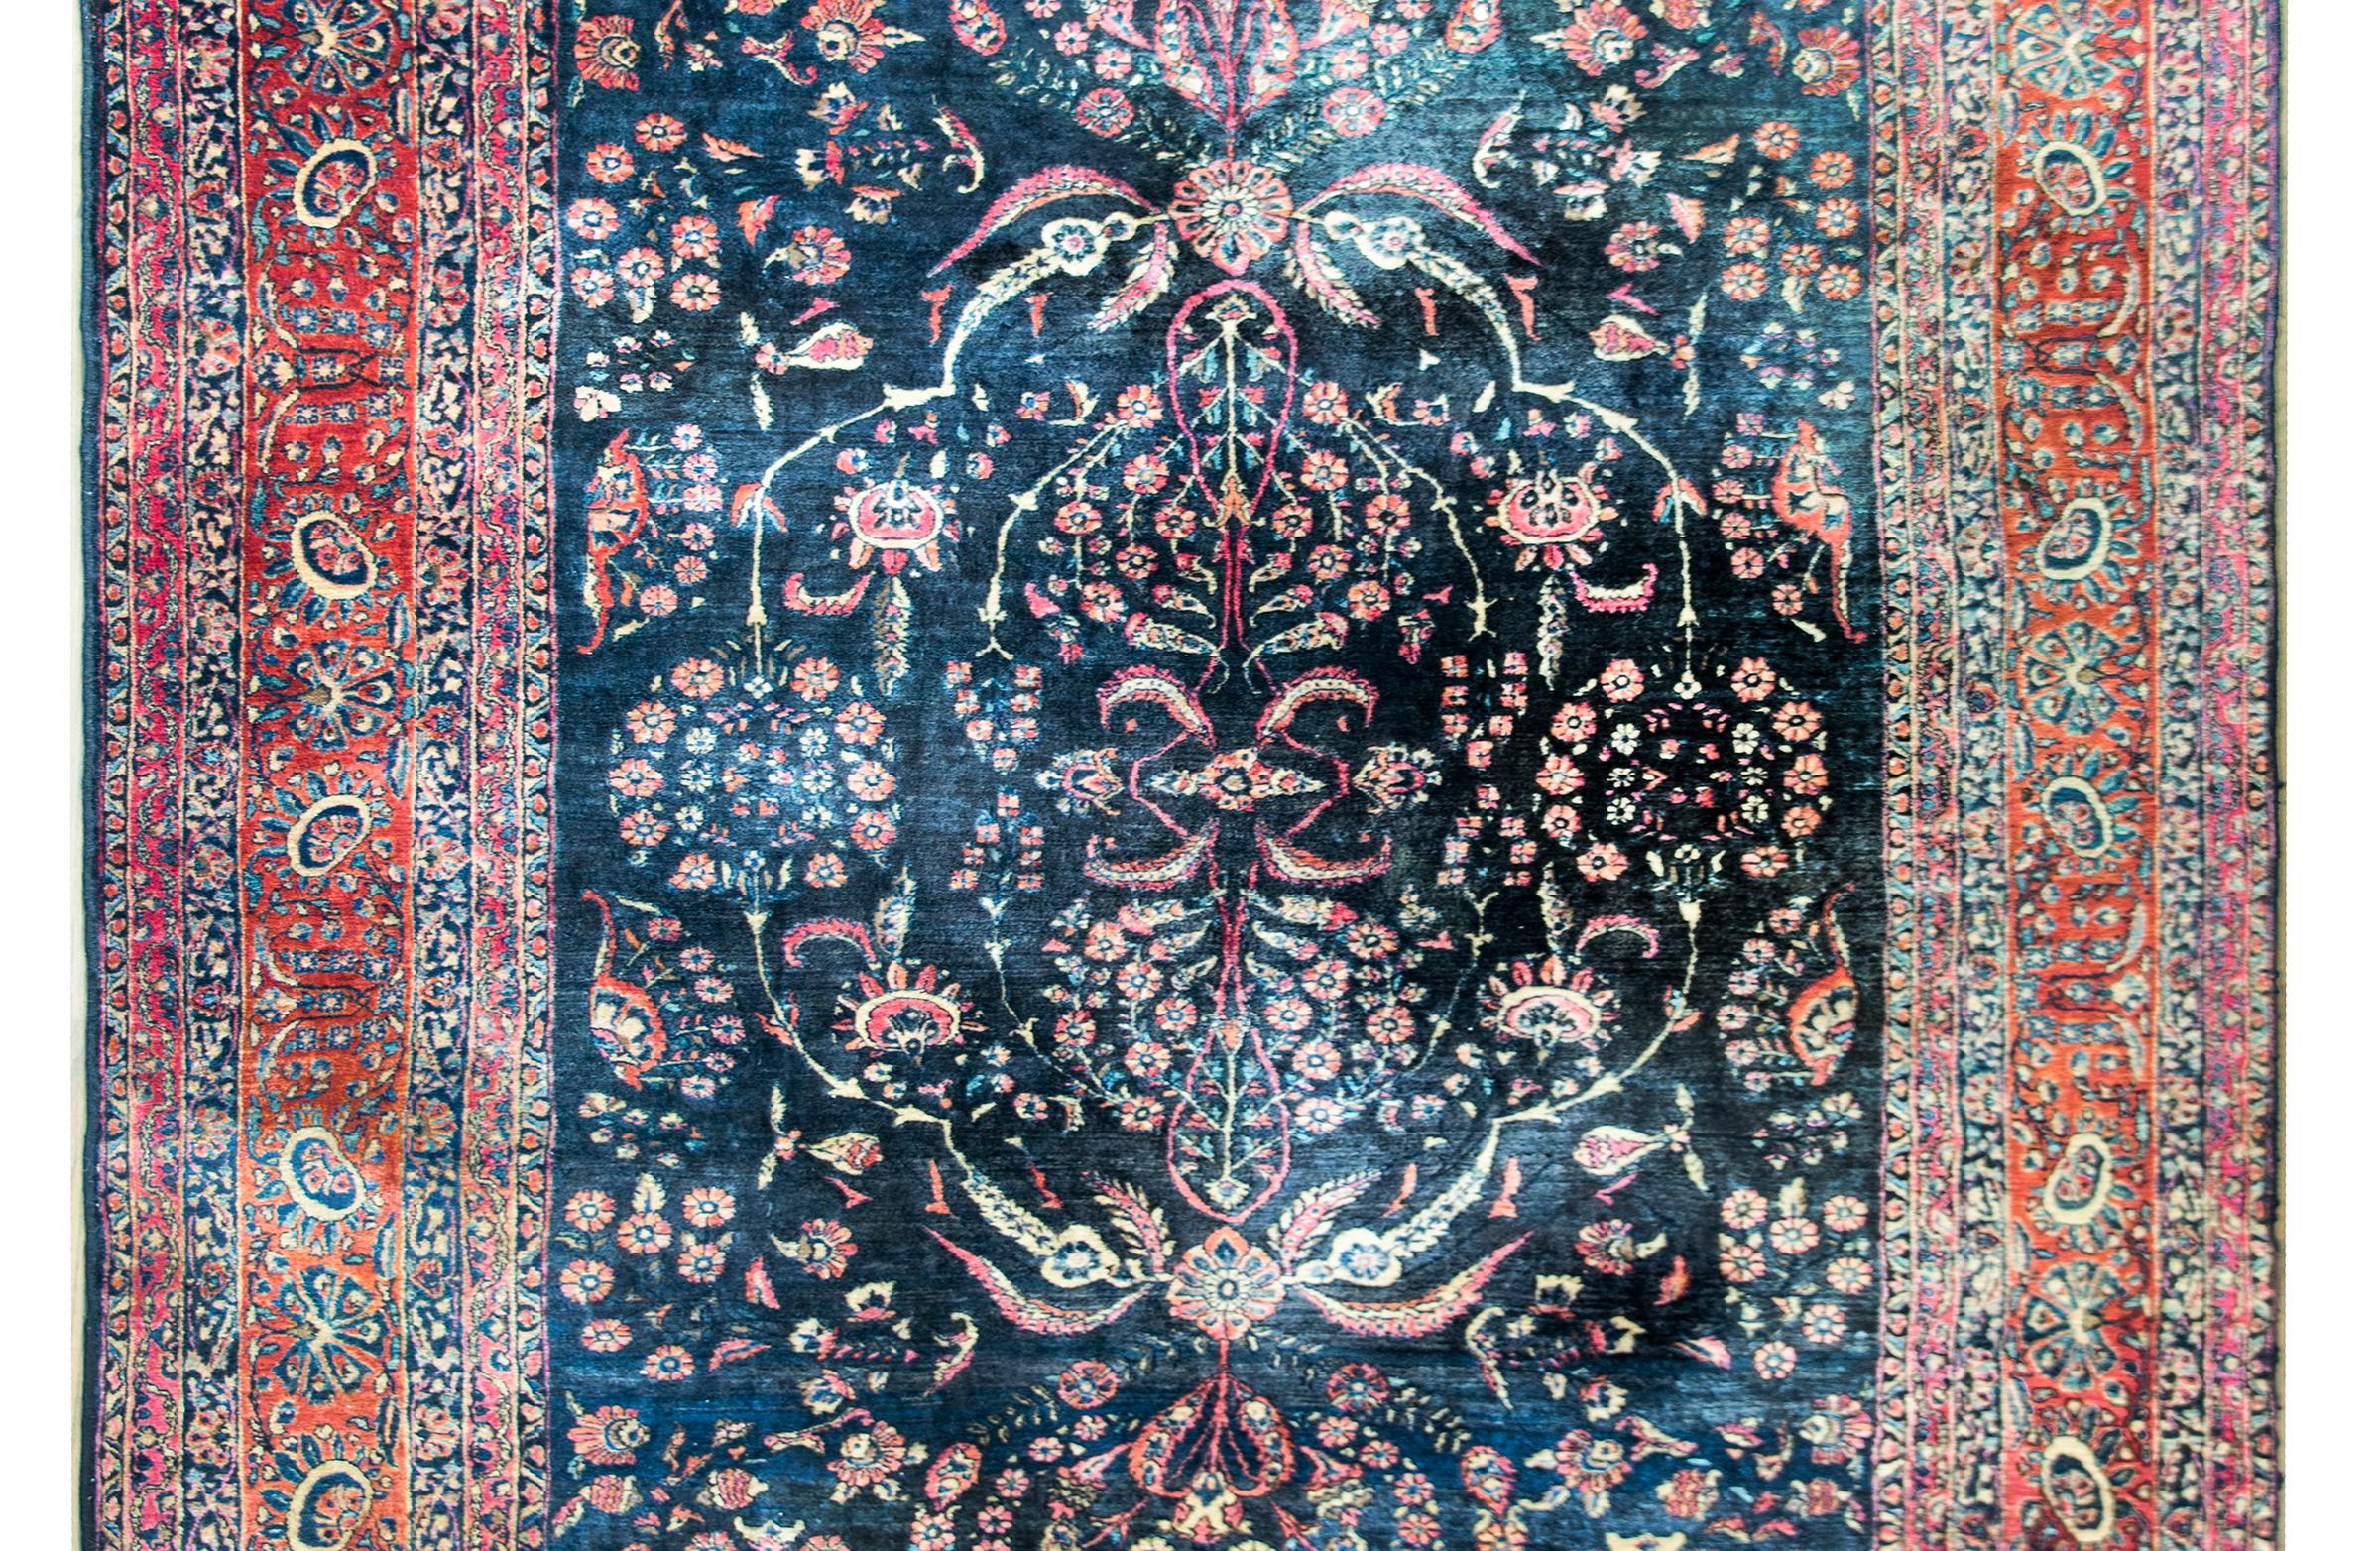 A beautiful large early 20th century Persian Sarouk Mohajeran rug with a lacy mirrored floral pattern in the center woven in traditional Sarouk colors of pink, crimson, creams and indigo, and set against a dark indigo background. The border is